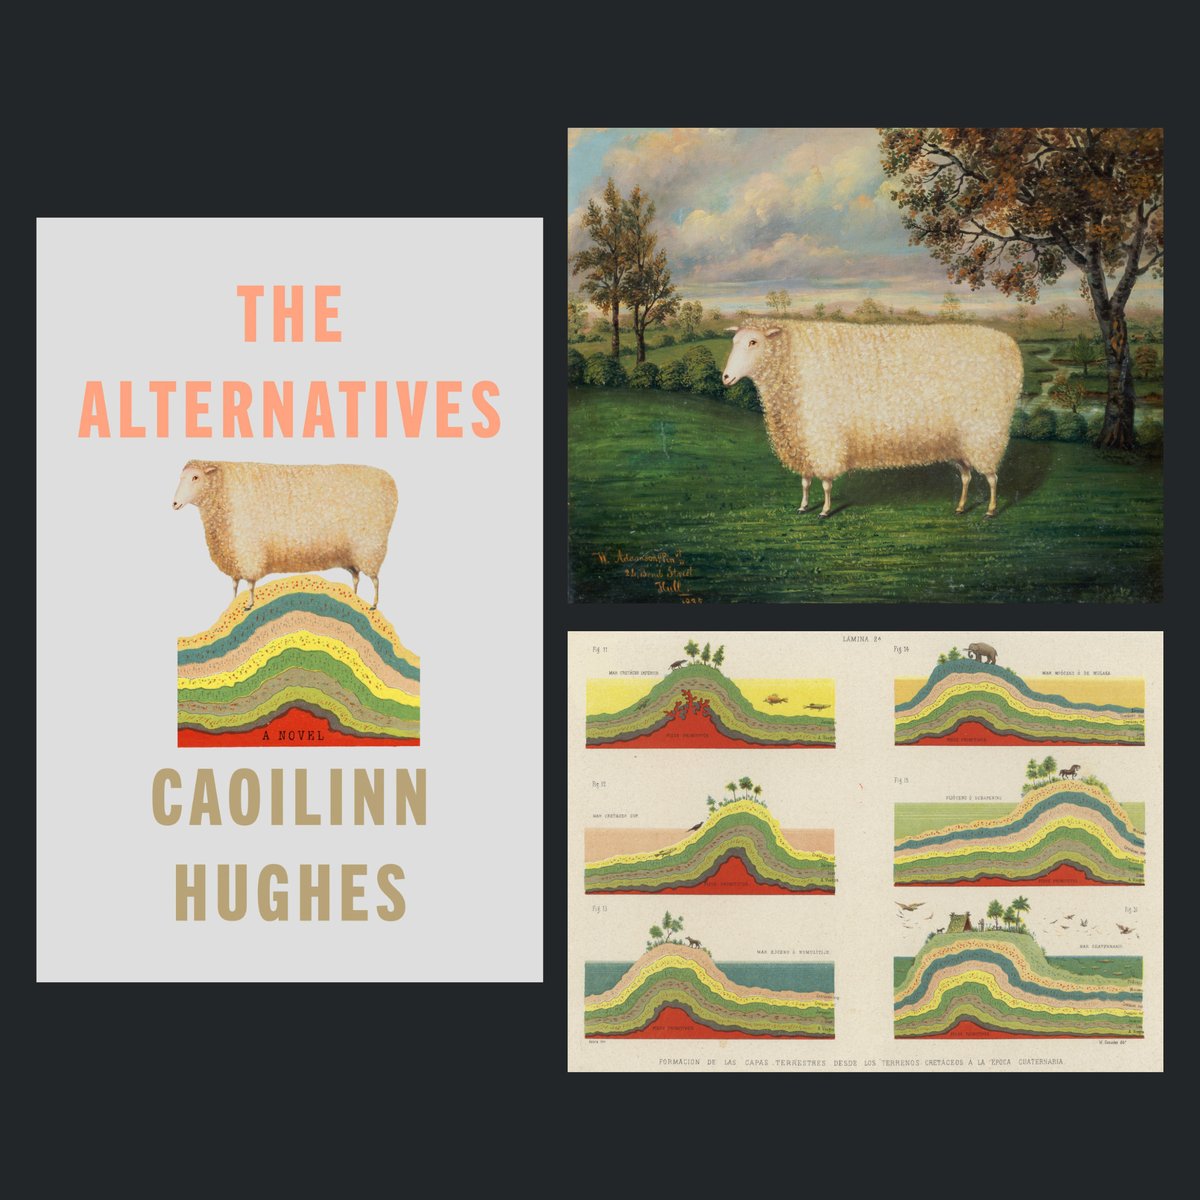 Lauren Peters-Collaer - The Alternatives by Caoilin Hughes. Published by Penguin Random House, United States.